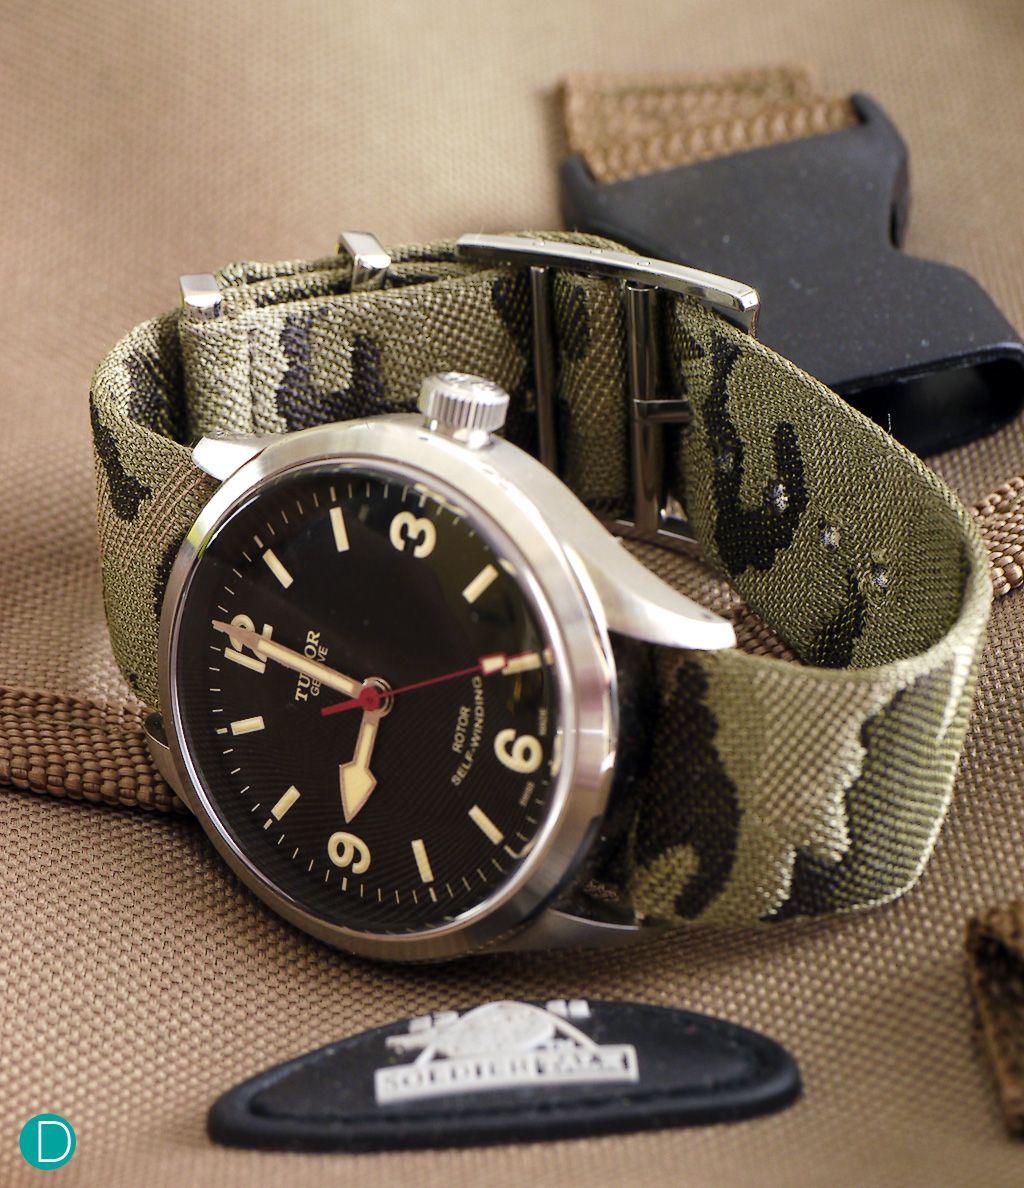 The Tudor Heritage Ranger with the nato strap option.